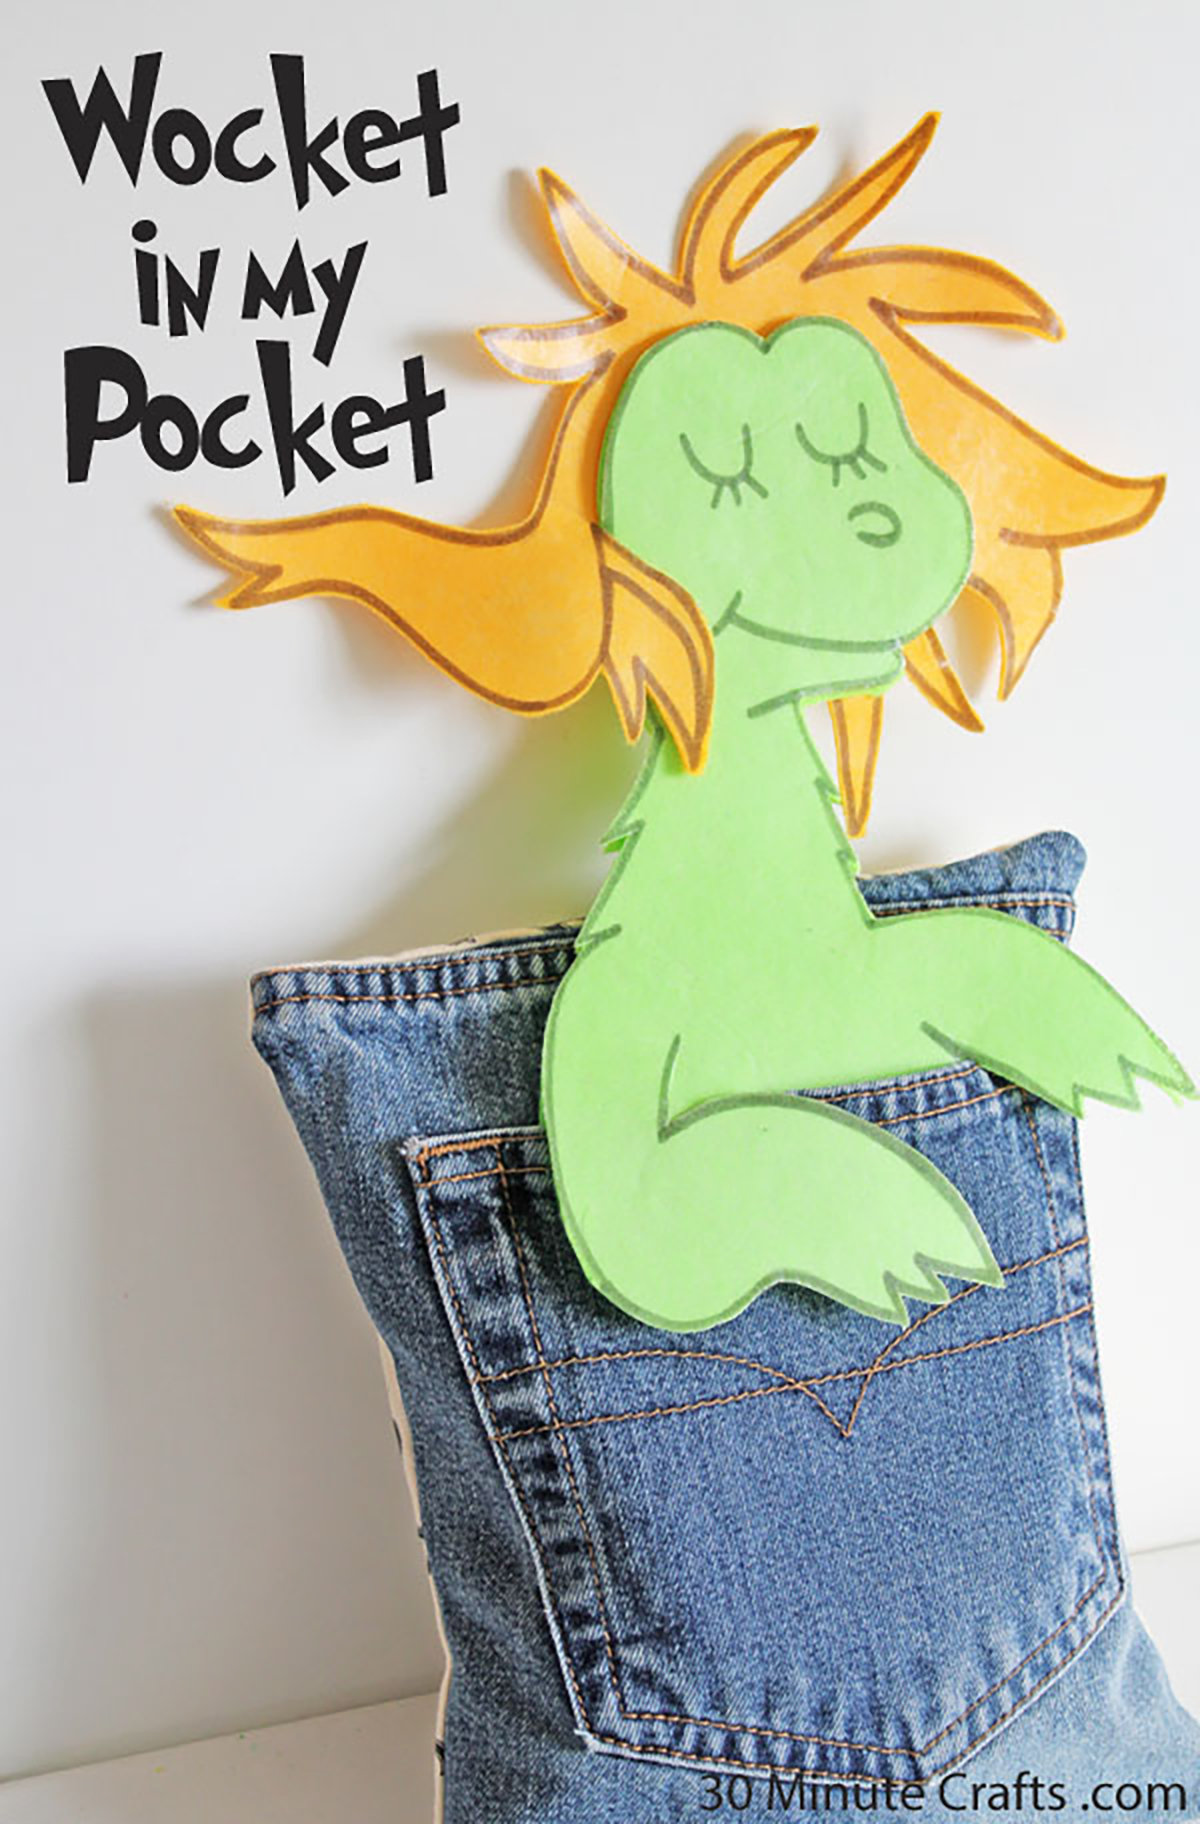 11 Creative Dr. Seuss Crafts Ignite Imaginations Making Learning To Read So Much Fun